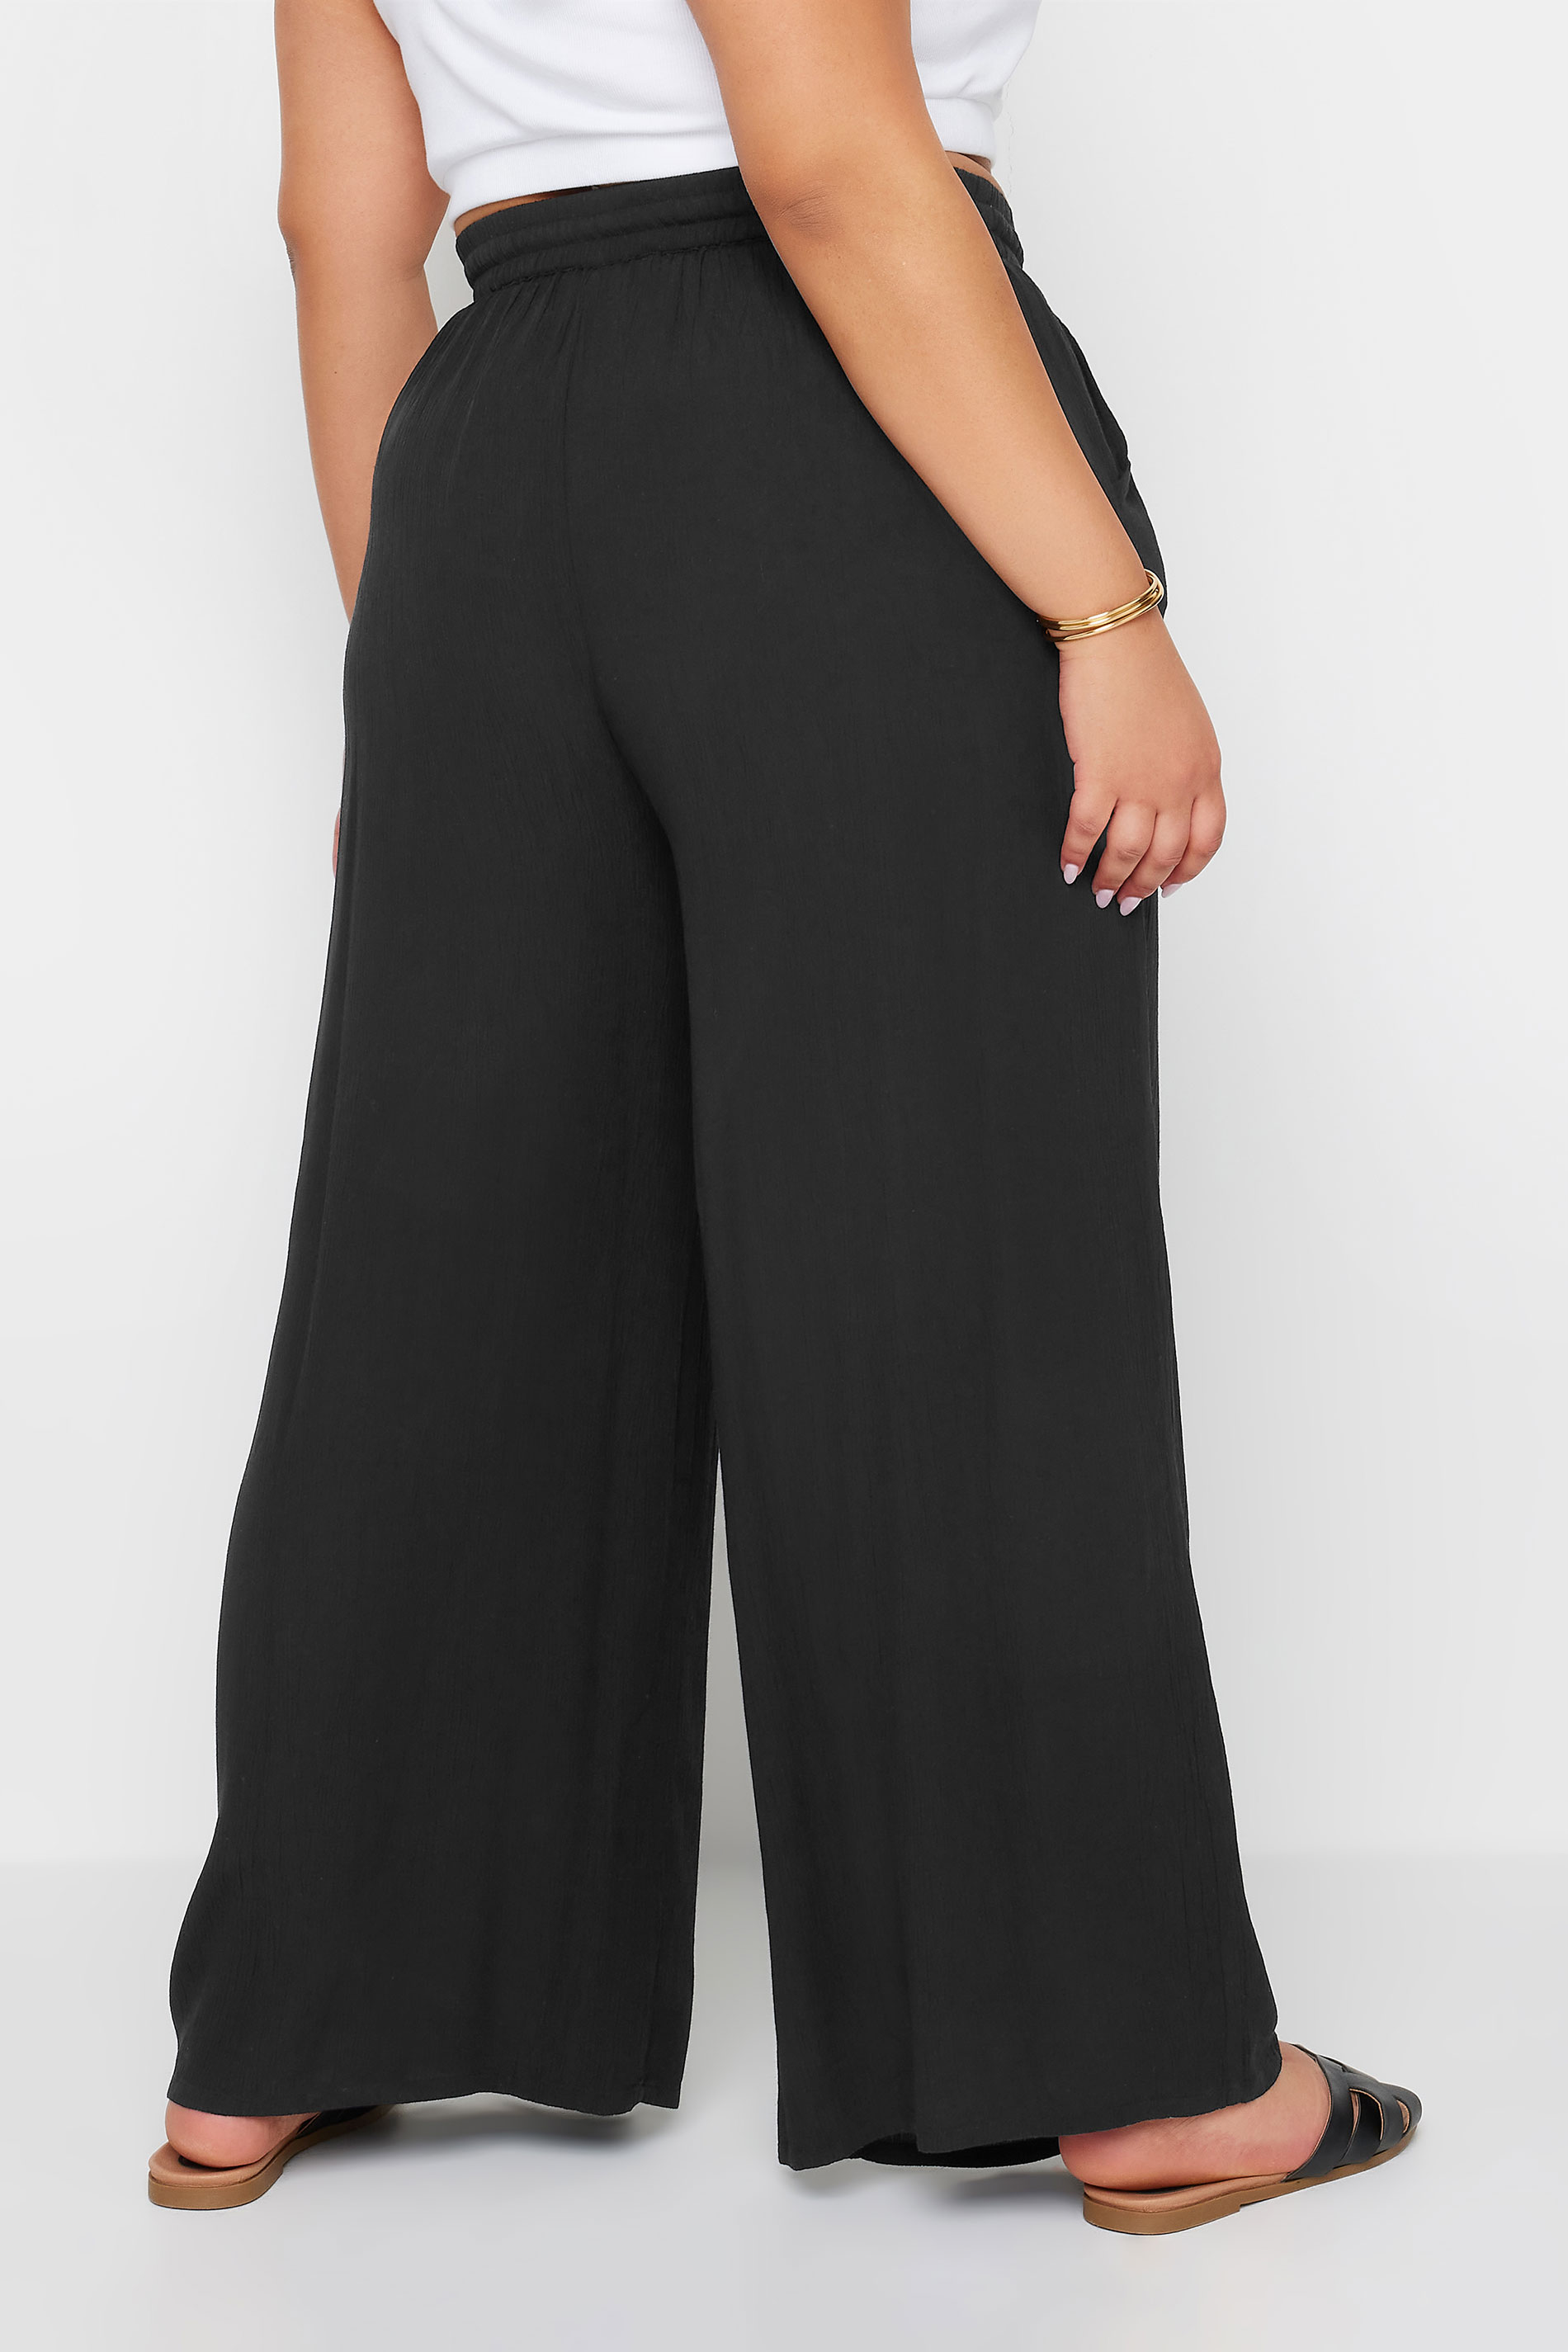 YOURS Plus Size Black Crinkle Drawstring Trousers | Yours Clothing 3